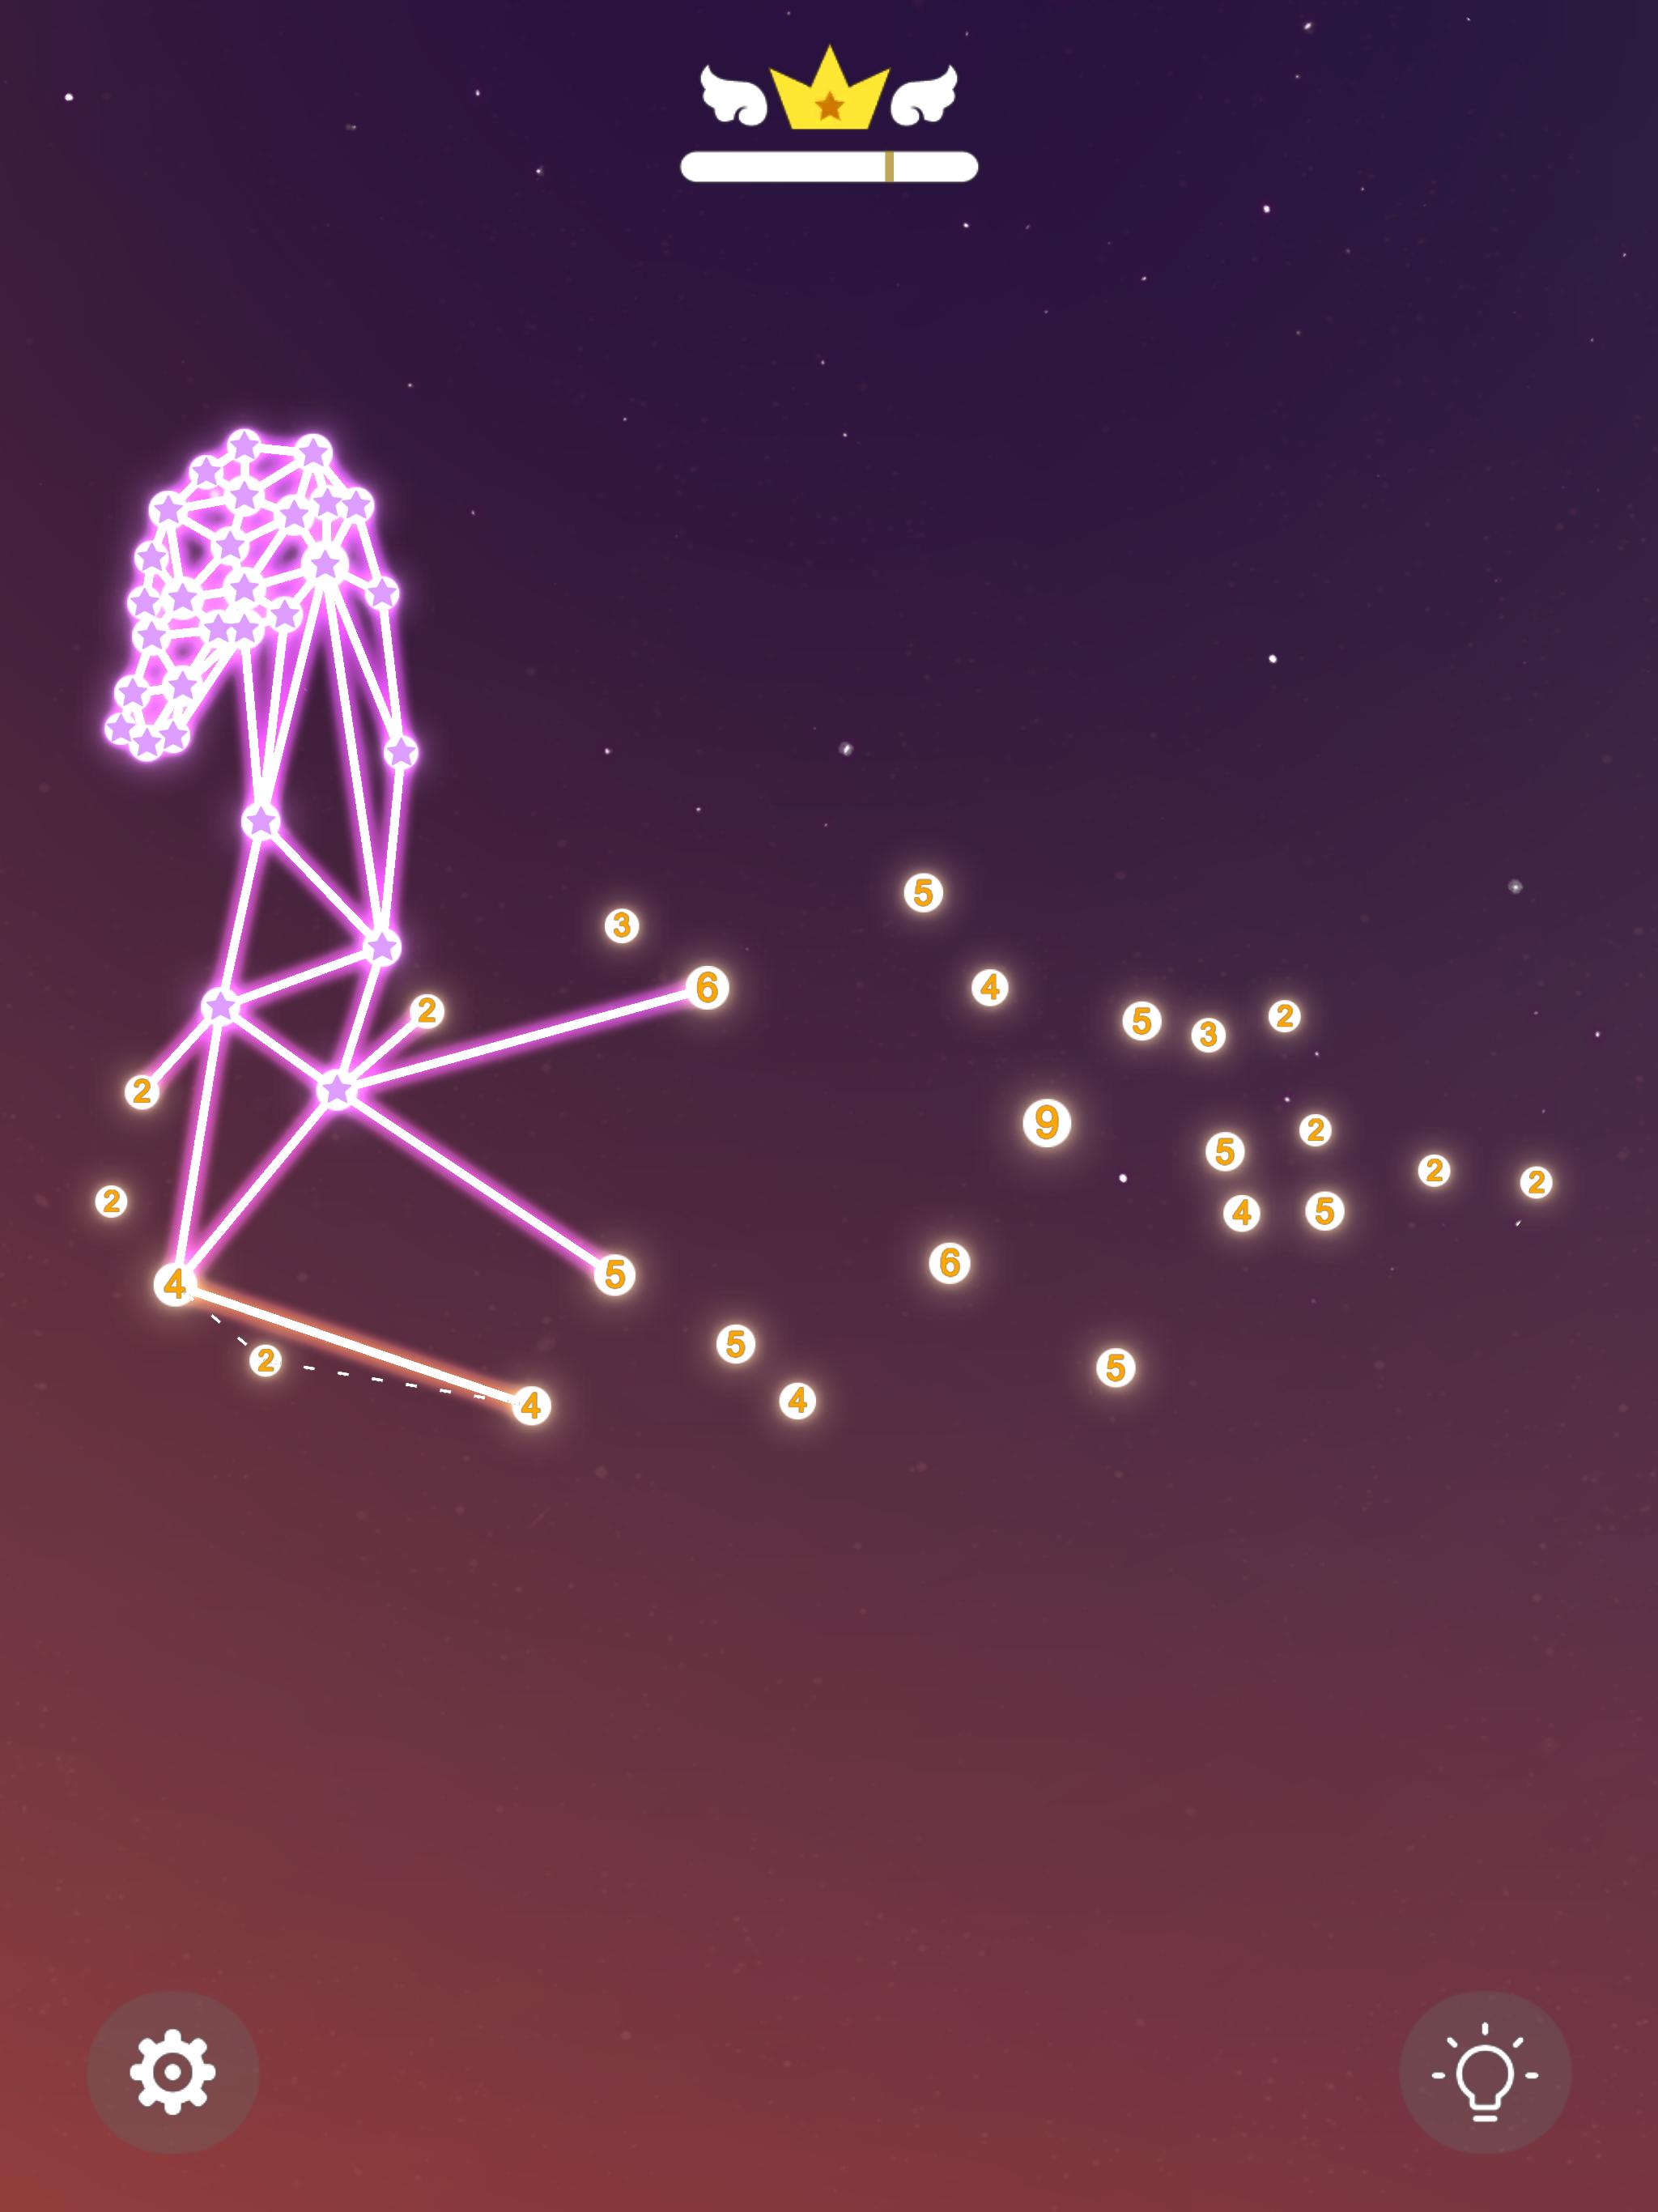 Linepoly Puzzle - Constellation games 1.2.3 Screenshot 19